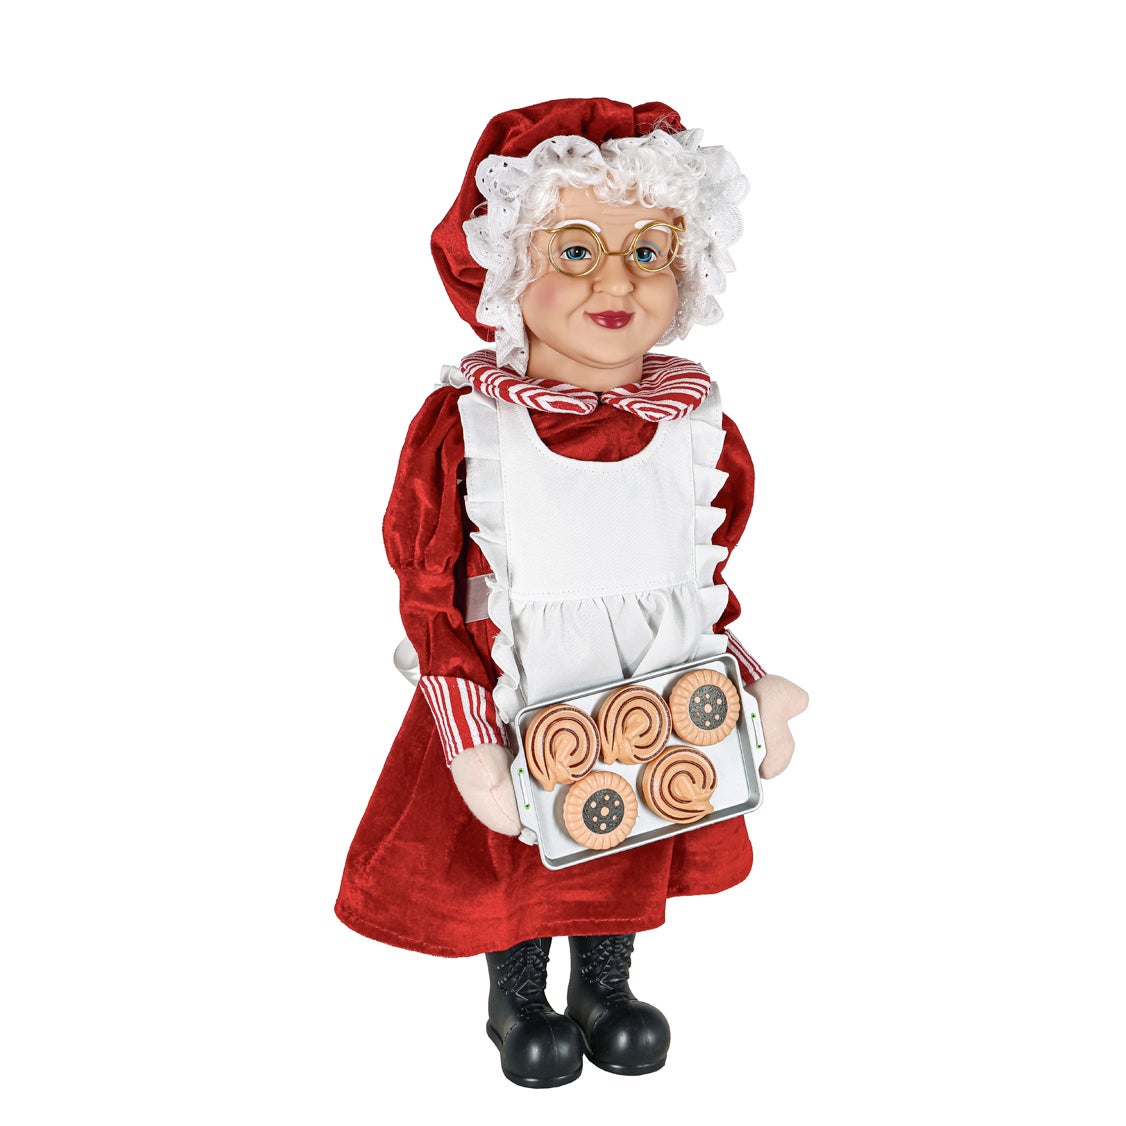 24" Fabric Mrs. Claus with Sheet of Cookies